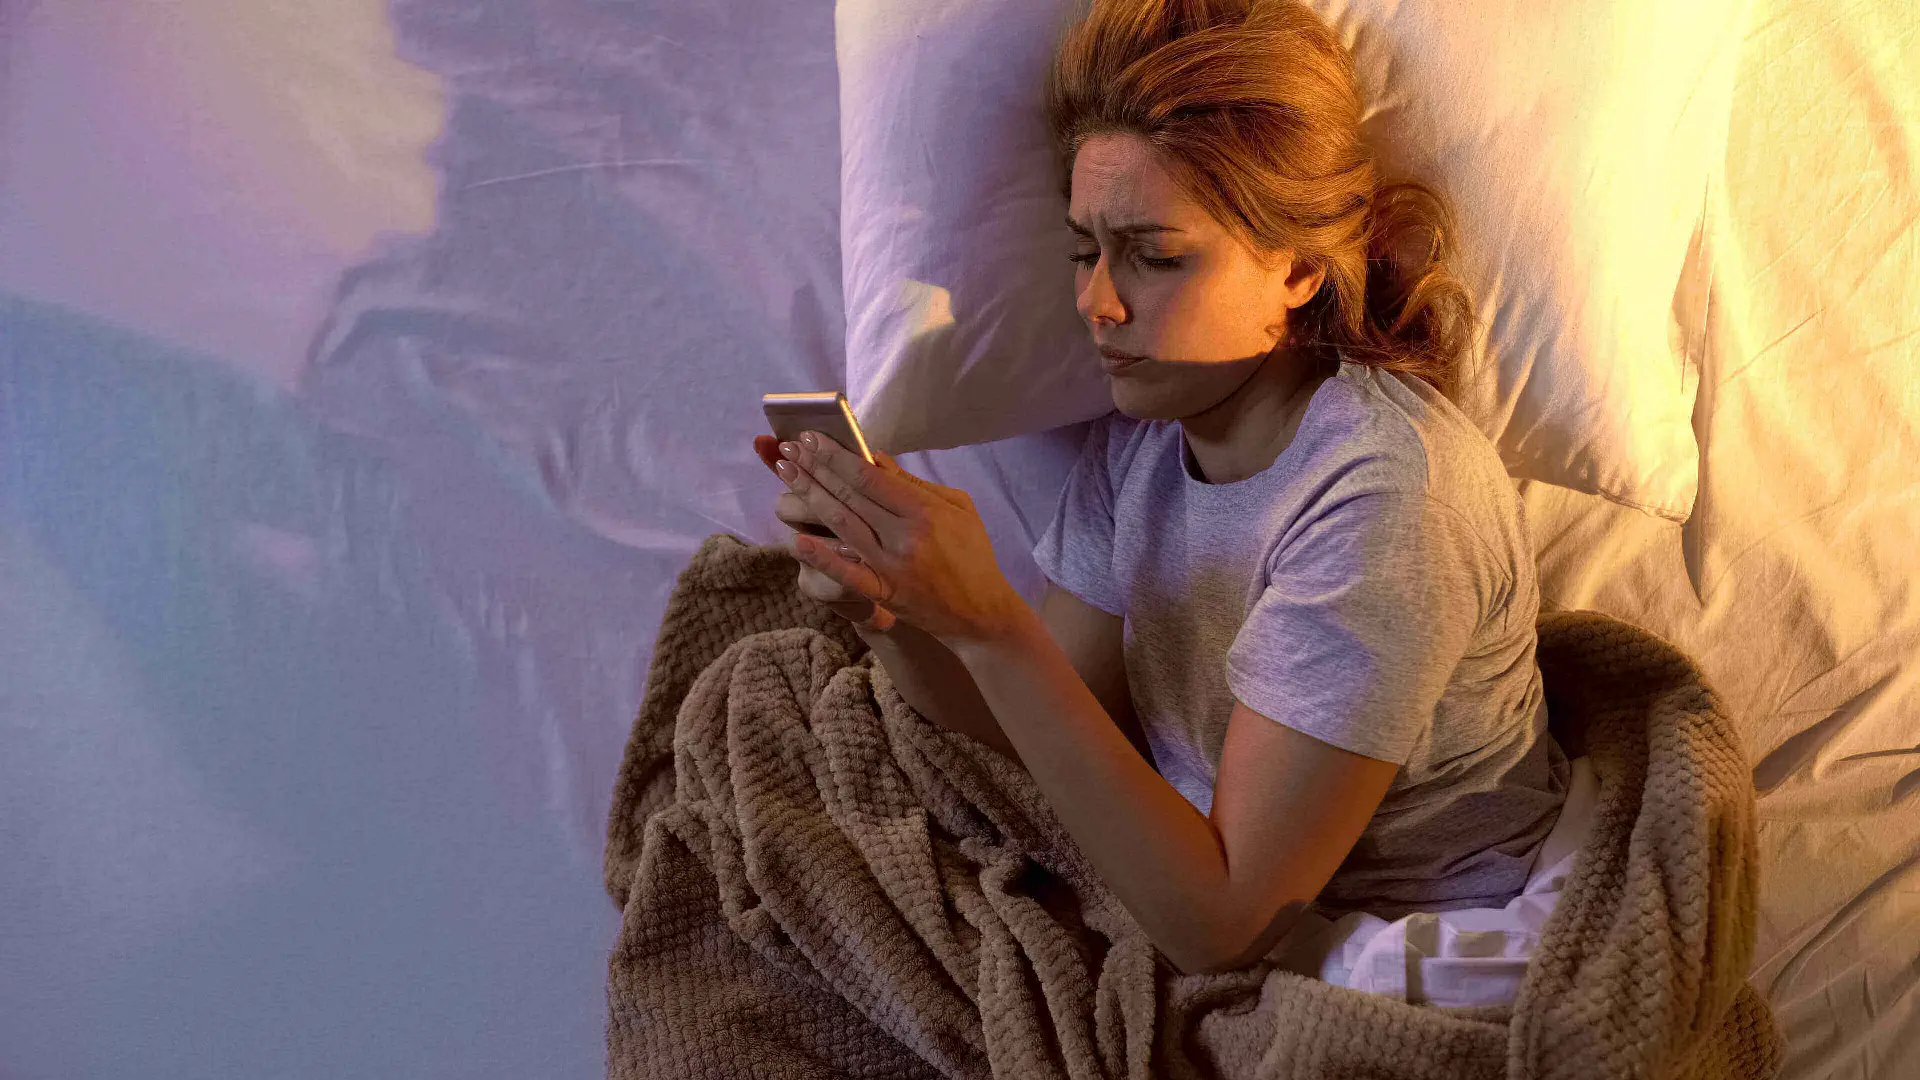 Woman laying in bed with a blanket on her. She is on her side while looking on her phone.